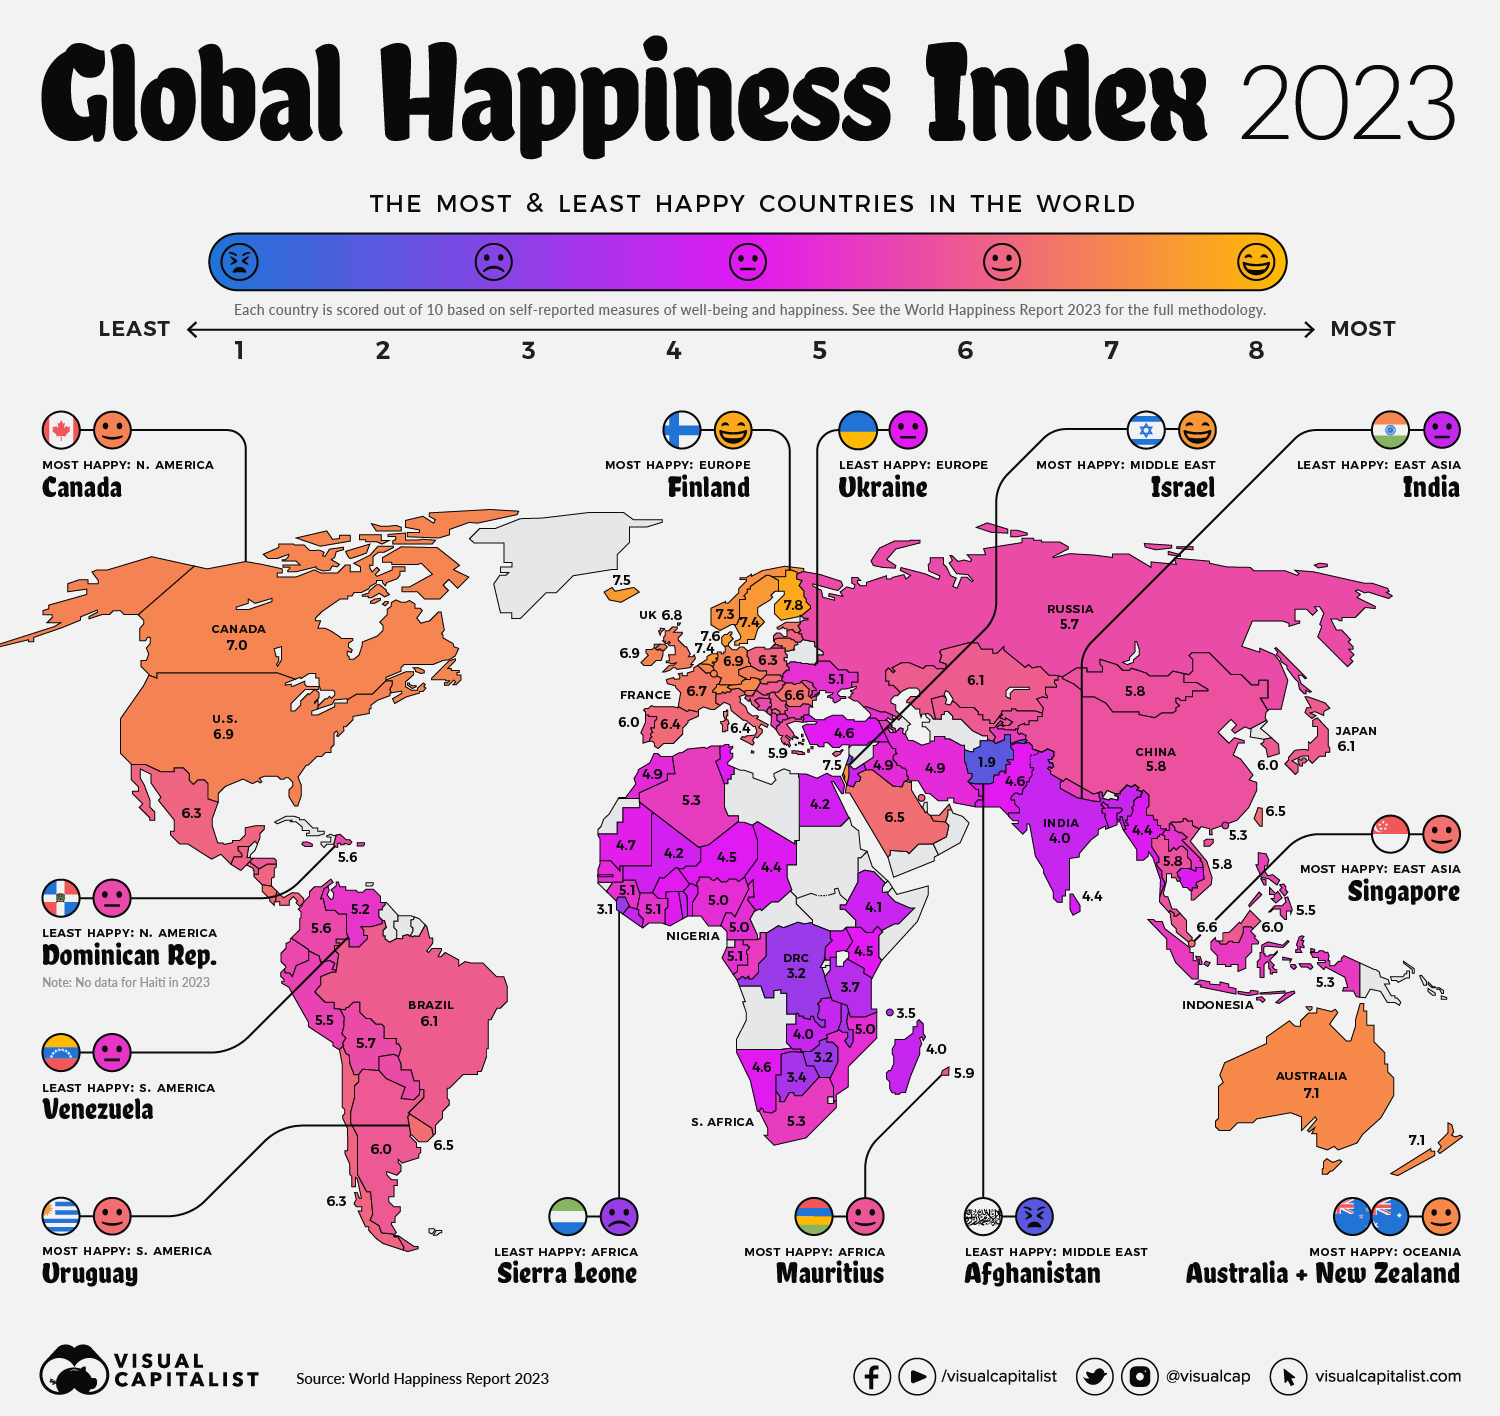 Mapped: The World’s Happiest Countries in 2023